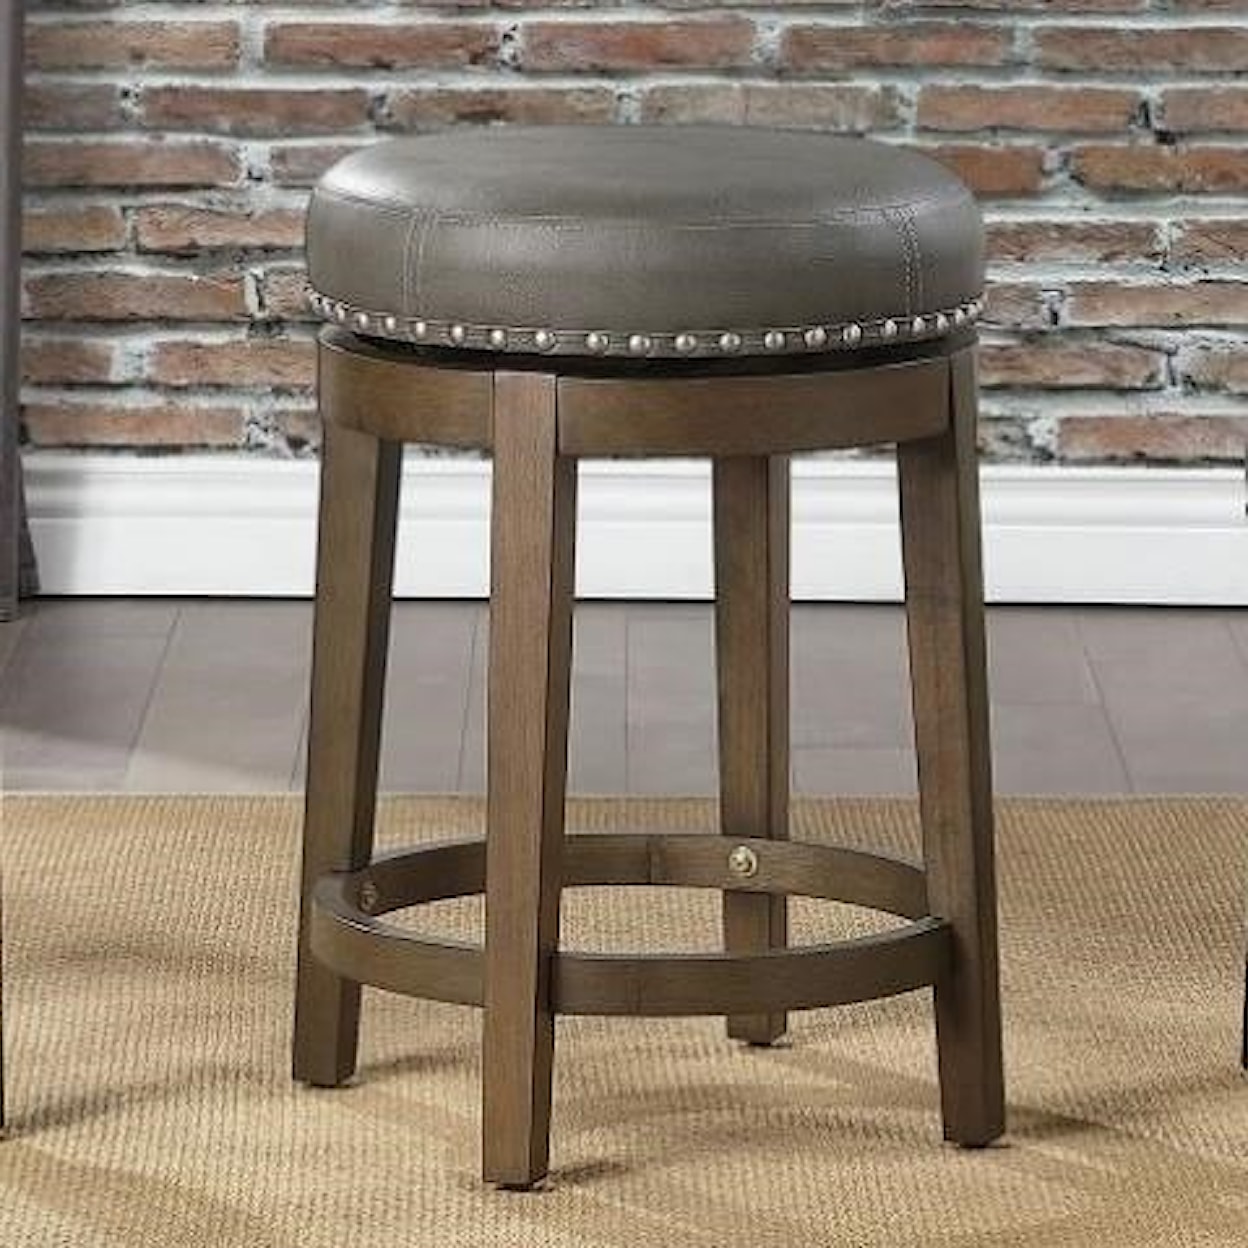 Homelegance Westby Round Swivel Counter Height Stool